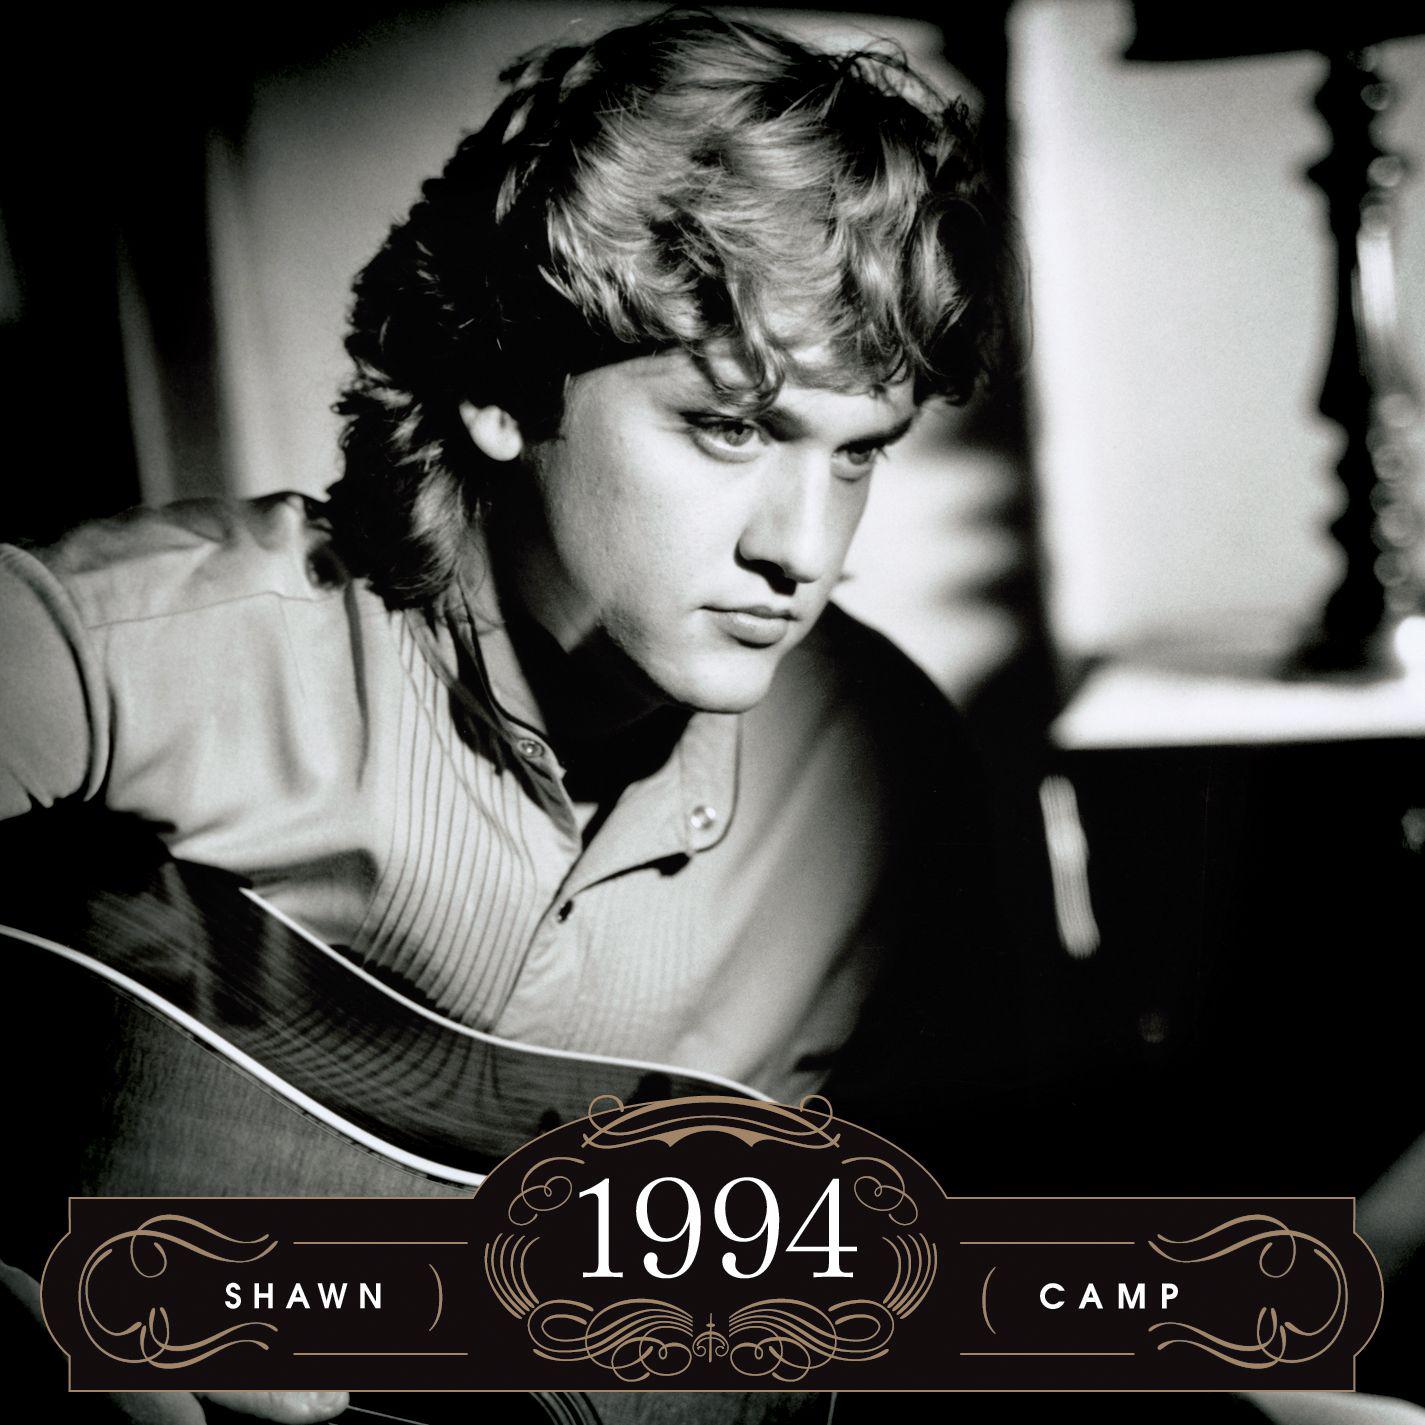 Shawn Camp - Stop, Look and Listen (Cow Catcher Blues)